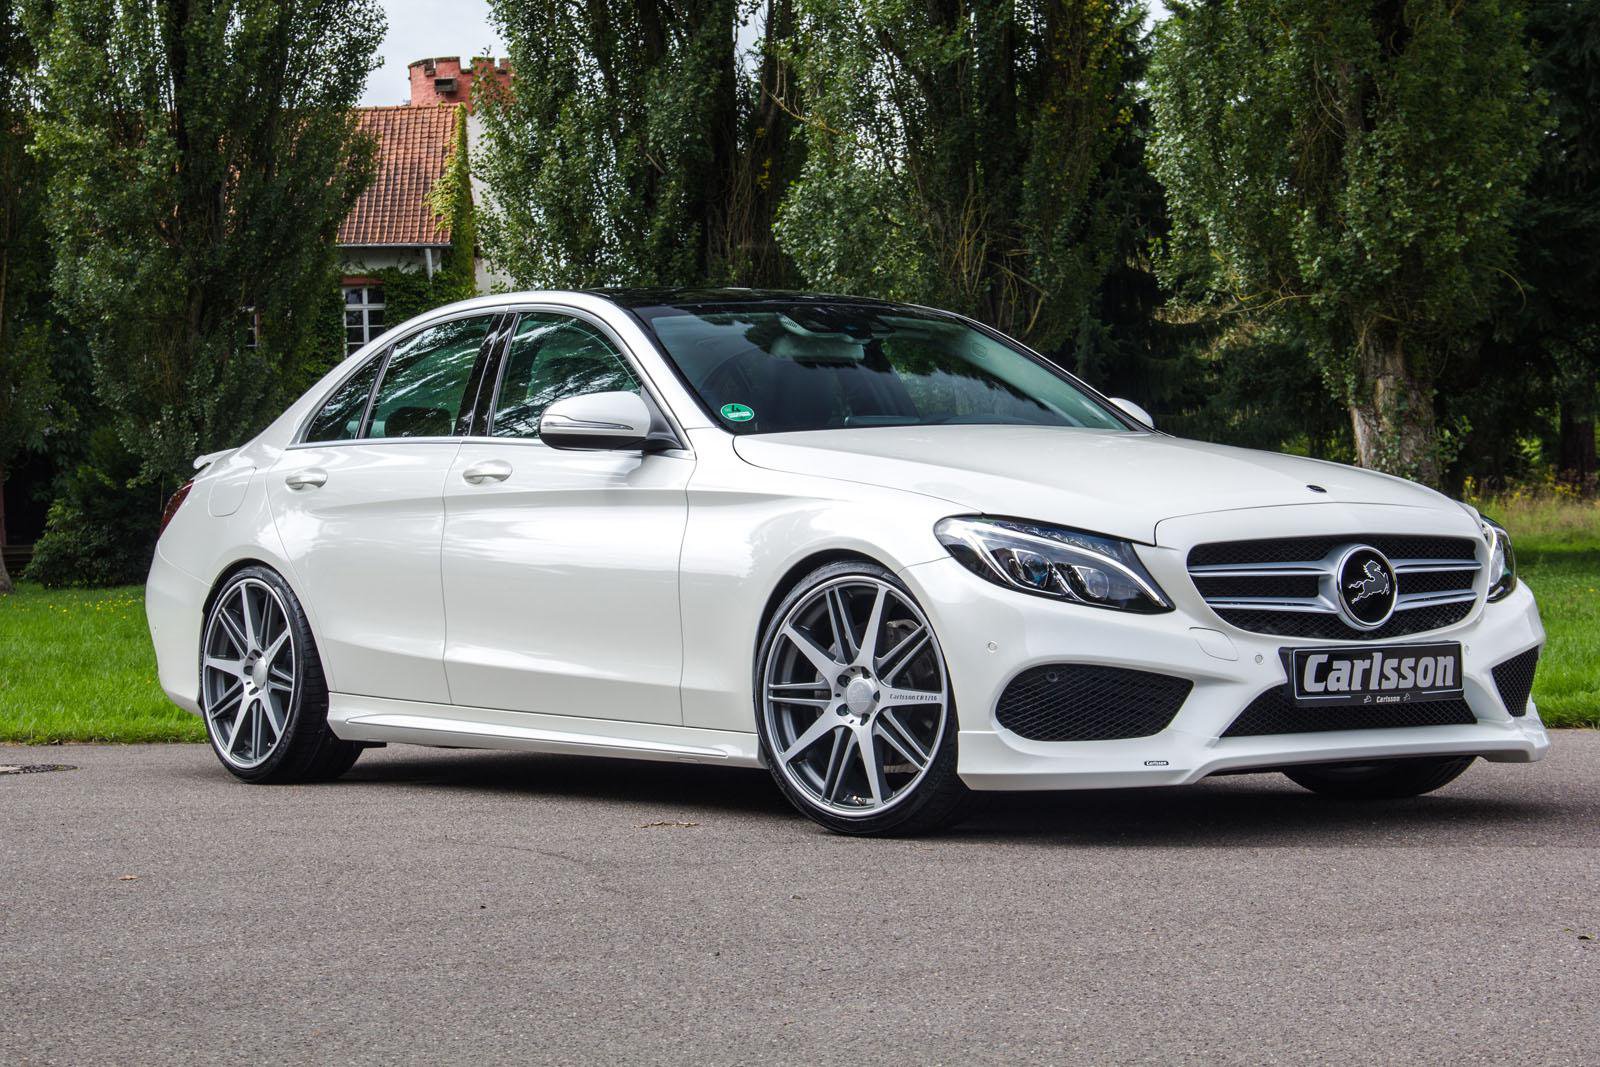 Mercedes-Benz C-Class: A Symbol of Sophistication in Israel